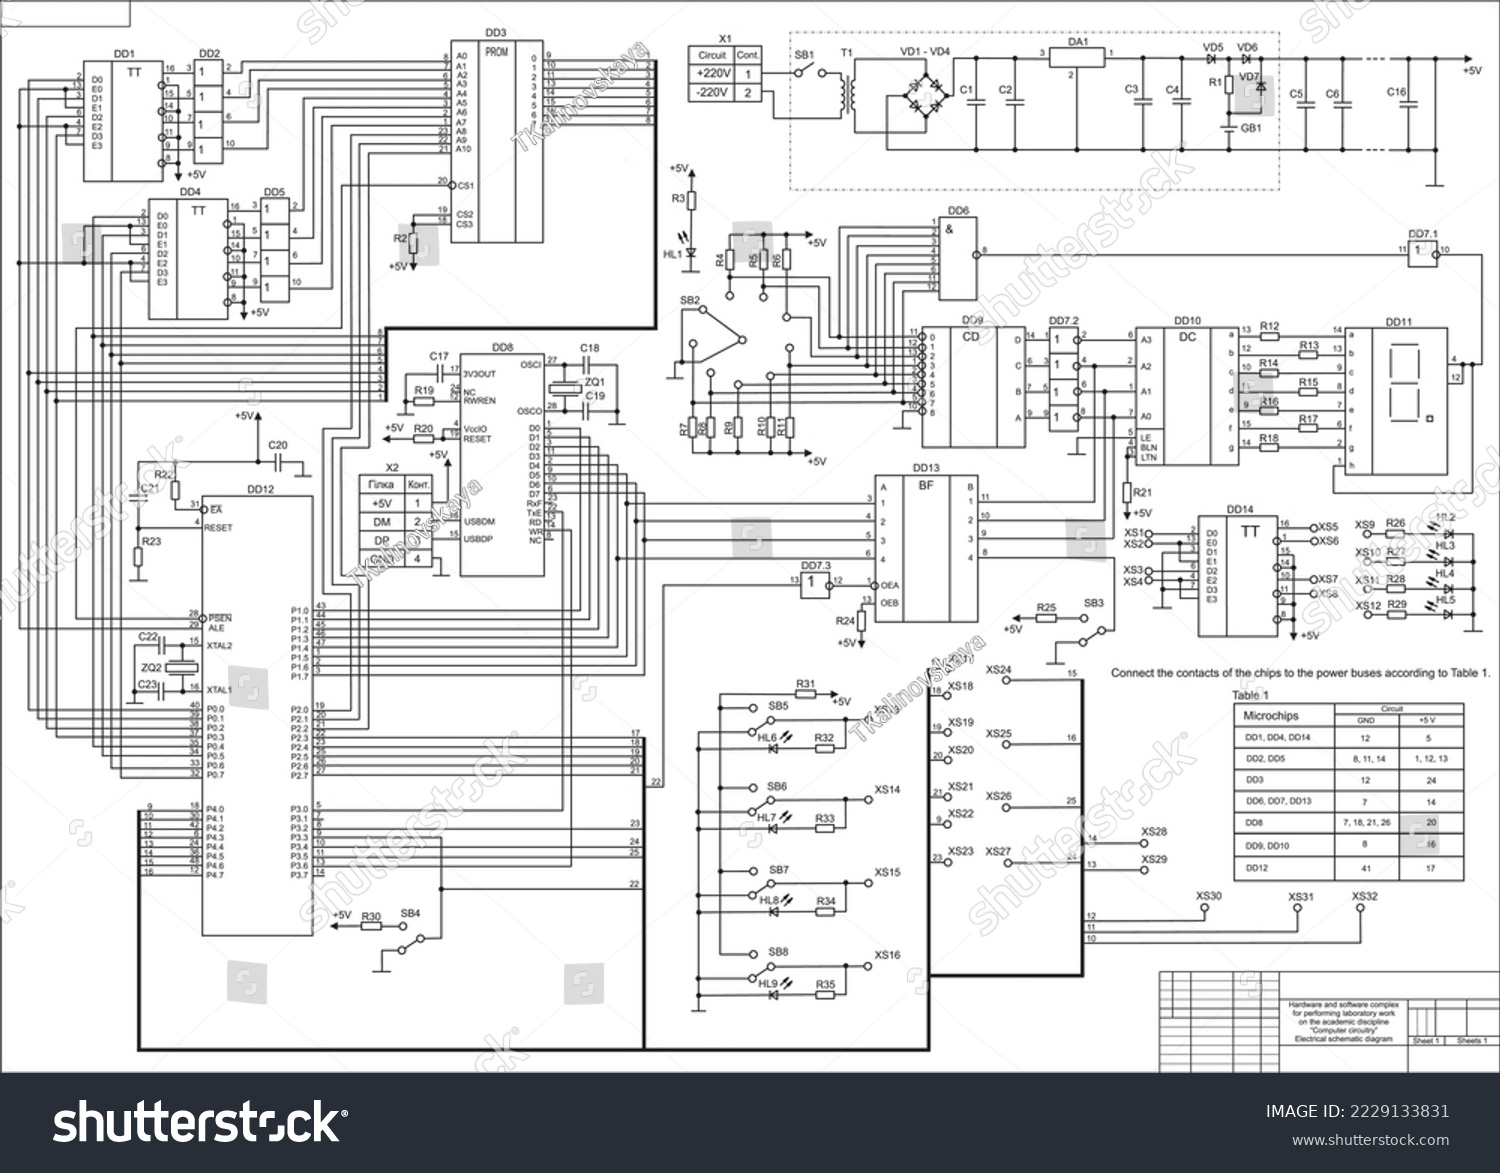 Electrical schematic diagram. Vector large drawing on white 
paper of a complex electrical circuit of an electronic device.
Graduation project. Scheme 1. #2229133831